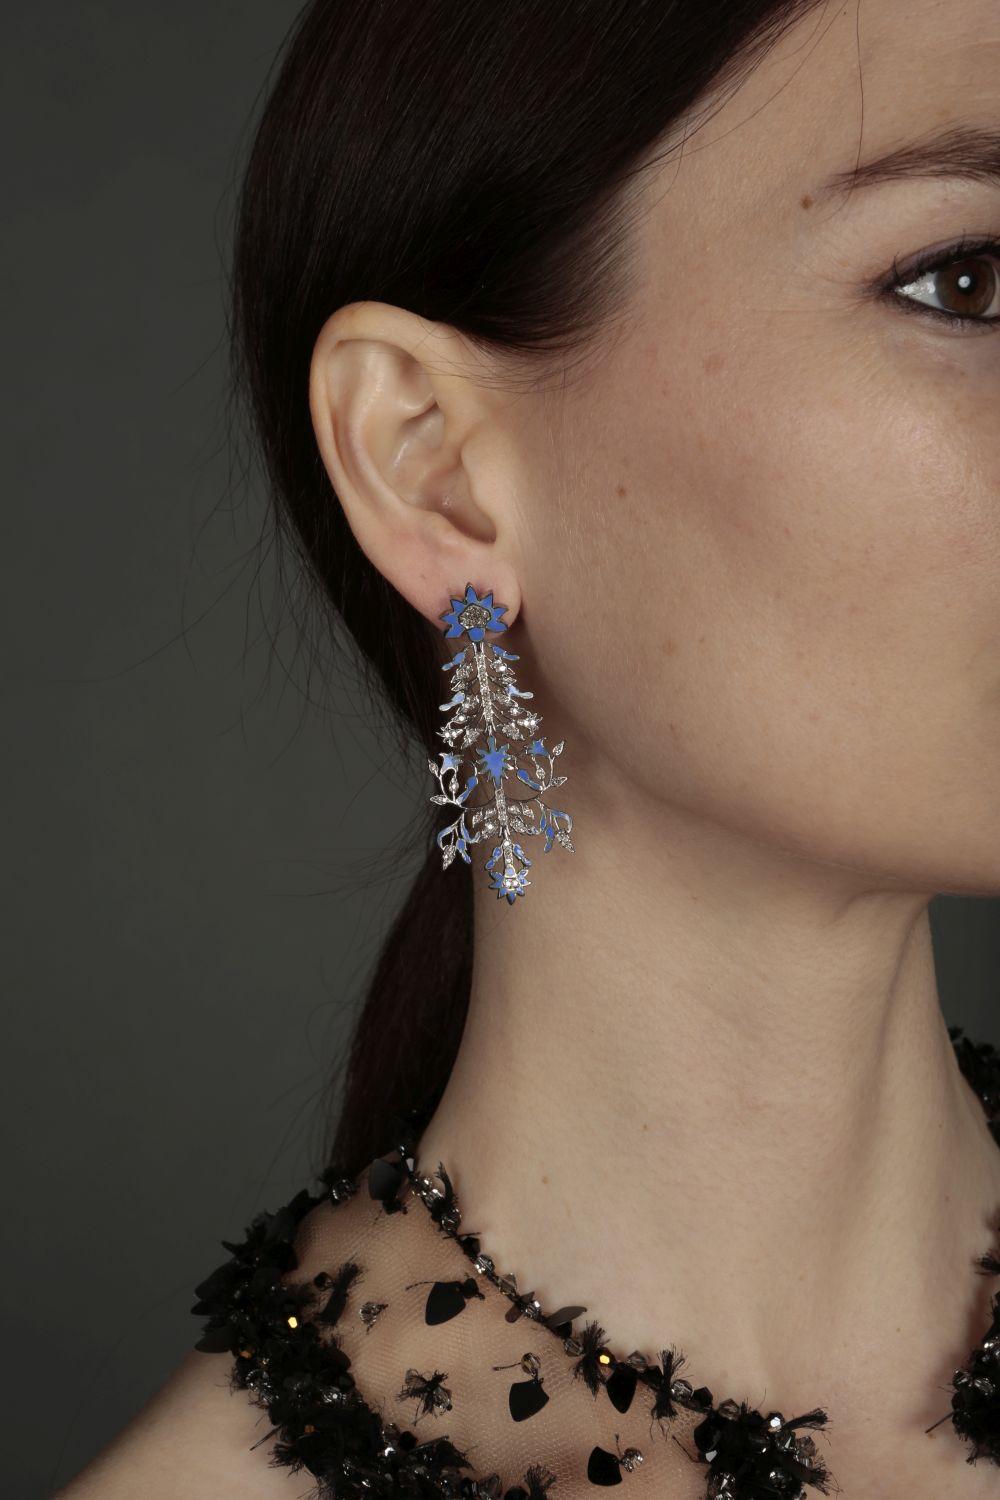 A truly spectacular pair of earrings inspired by an actual wall mural from the Mughal era. The Mughal Emperor Shah Jahan built the world renowned Taj Mahal as a tomb of his favourite wife, Mumtaz Mahal. It houses Shah Jahans tomb itself. Constructed